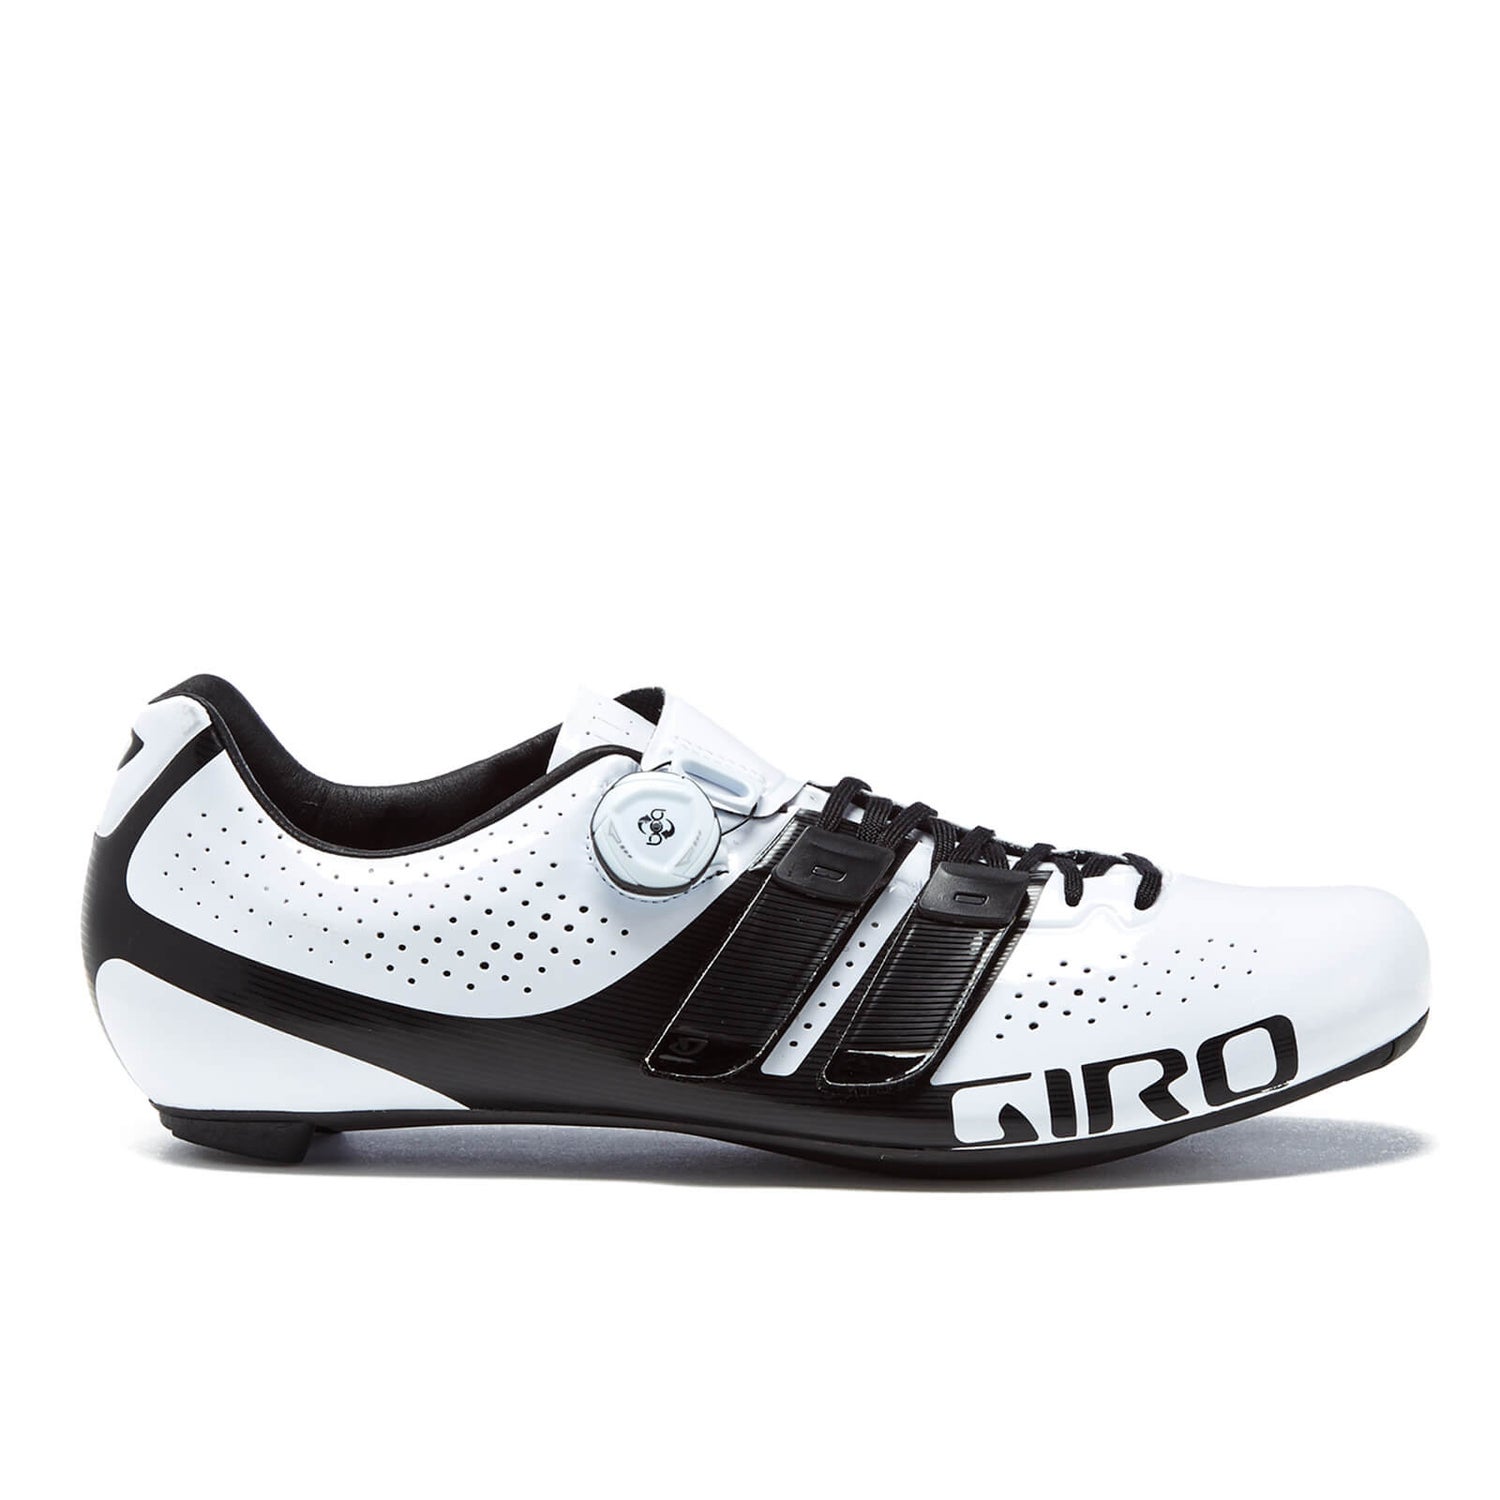 Giro Factor Techlace Road Cyling Shoes - White/Black